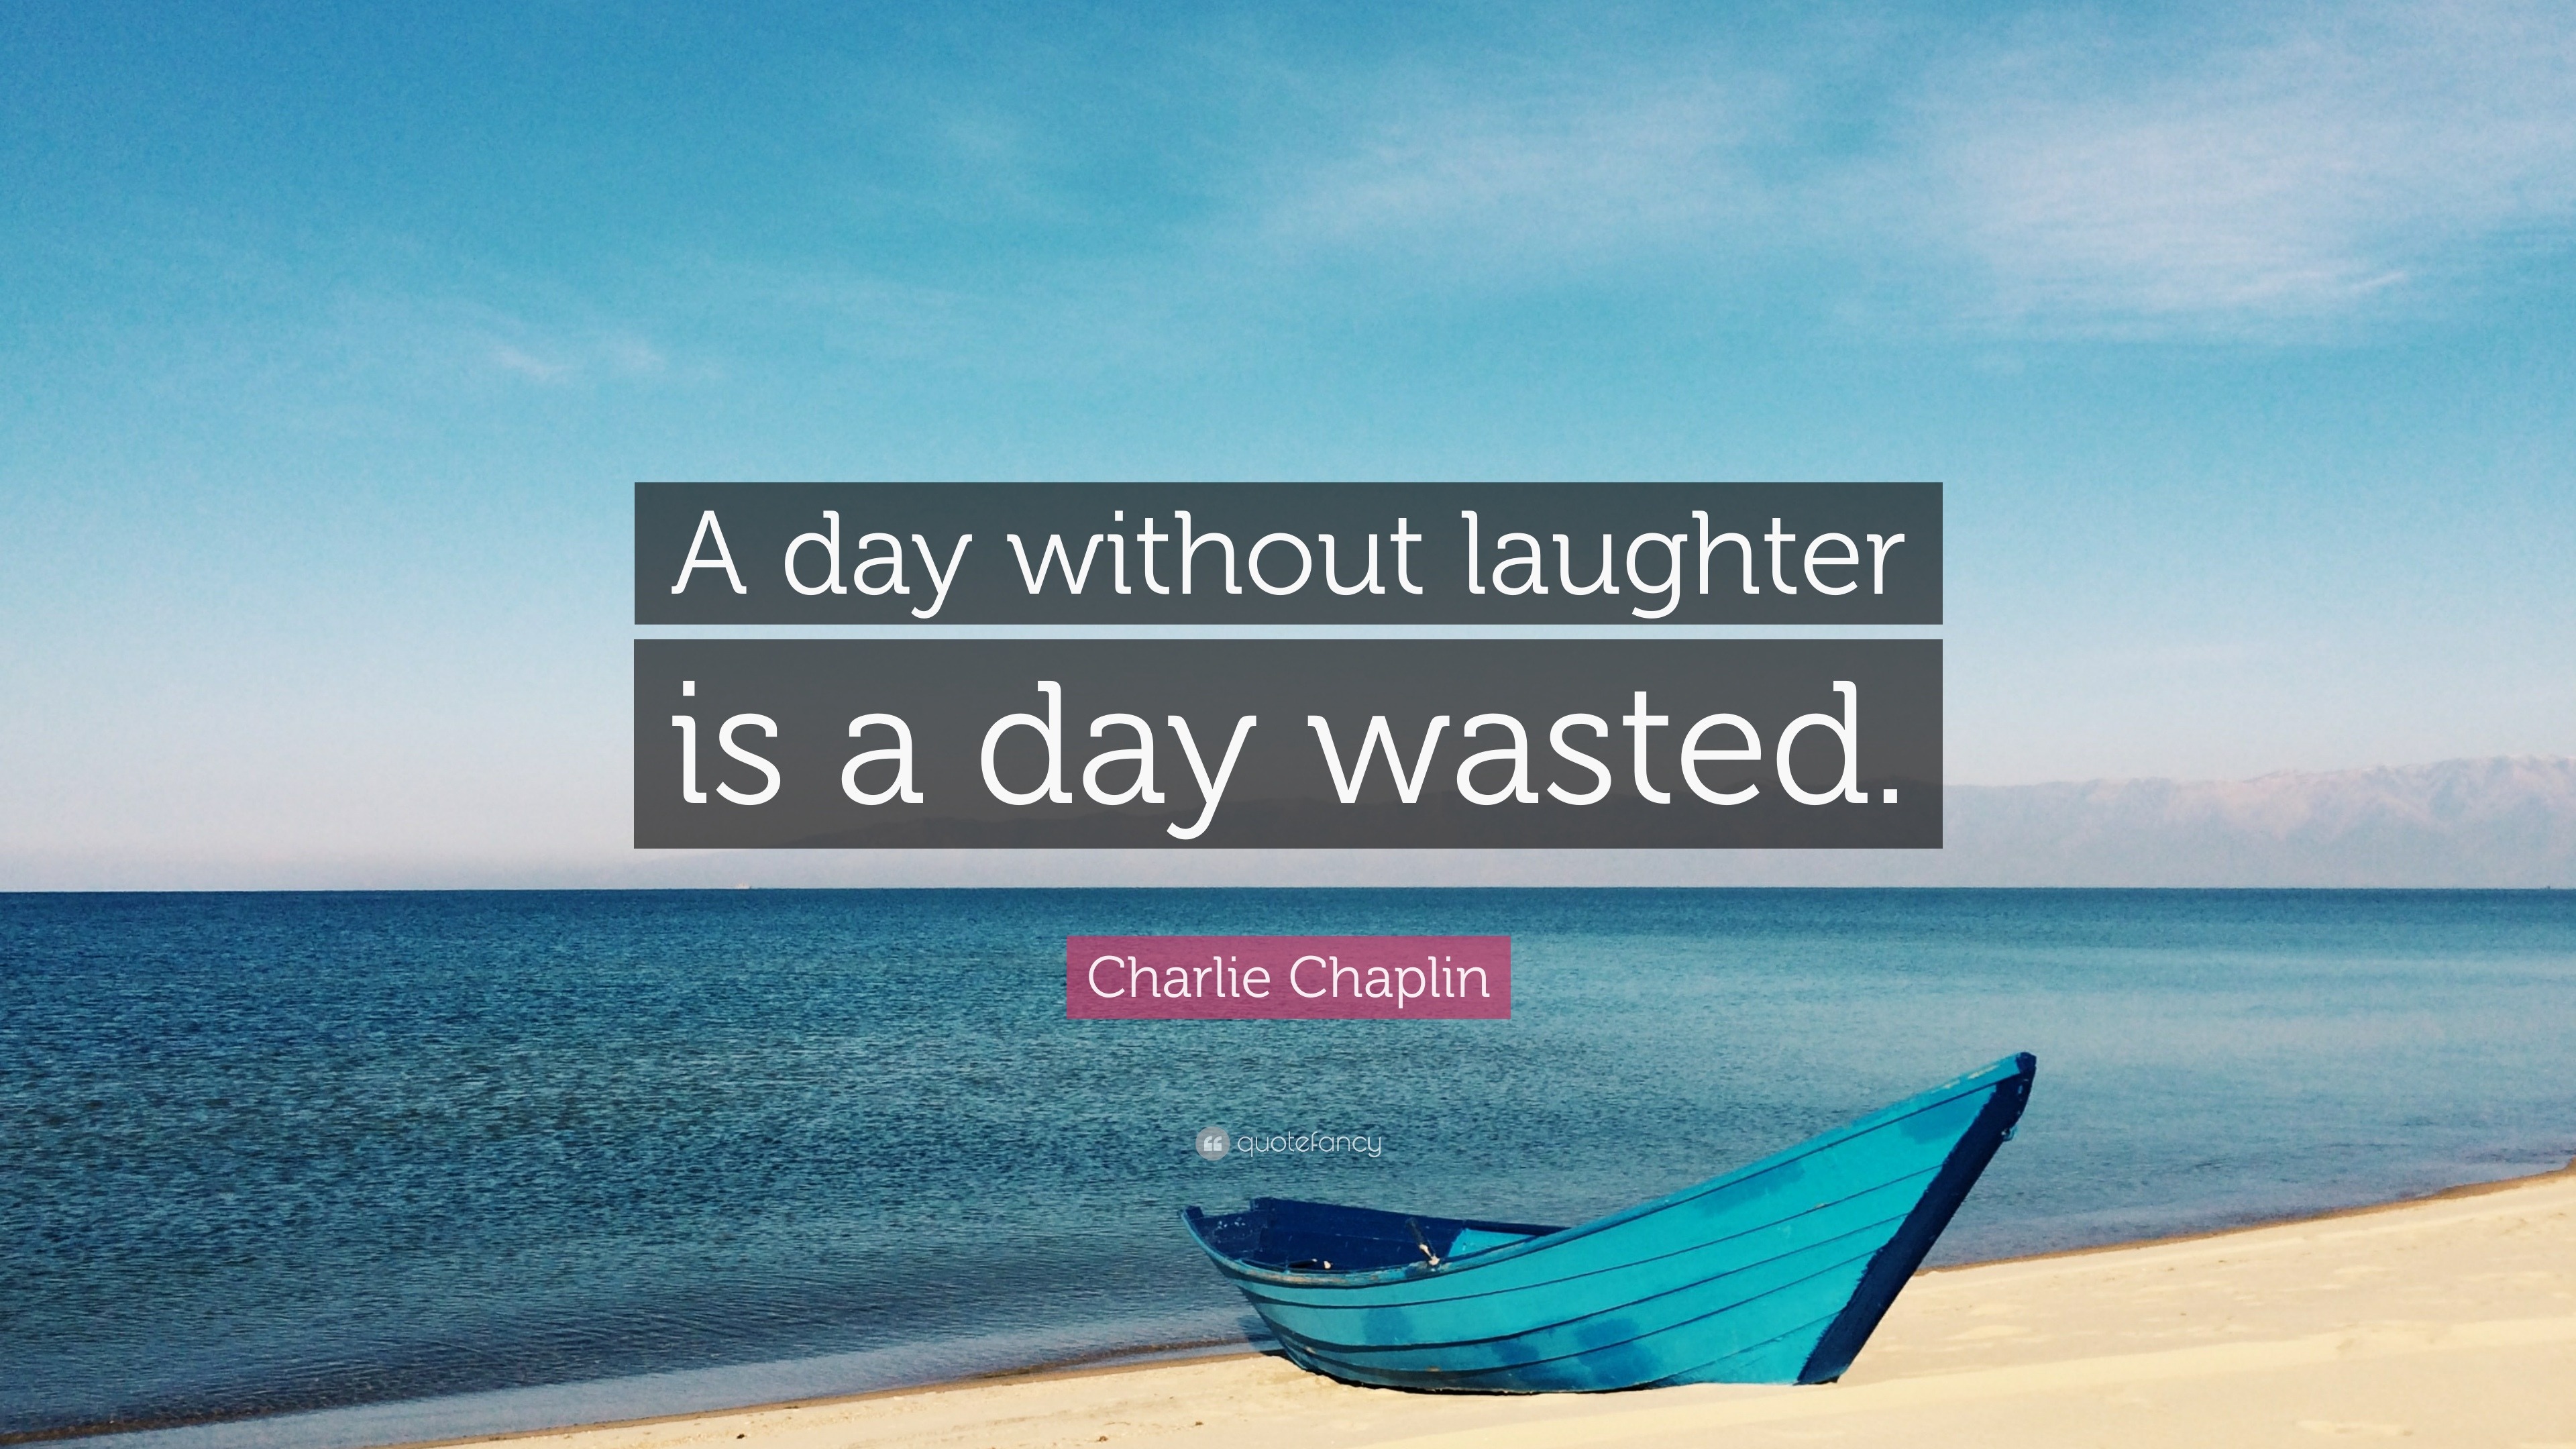 Charlie Chaplin Quote: “A day without laughter is a day wasted.” (12